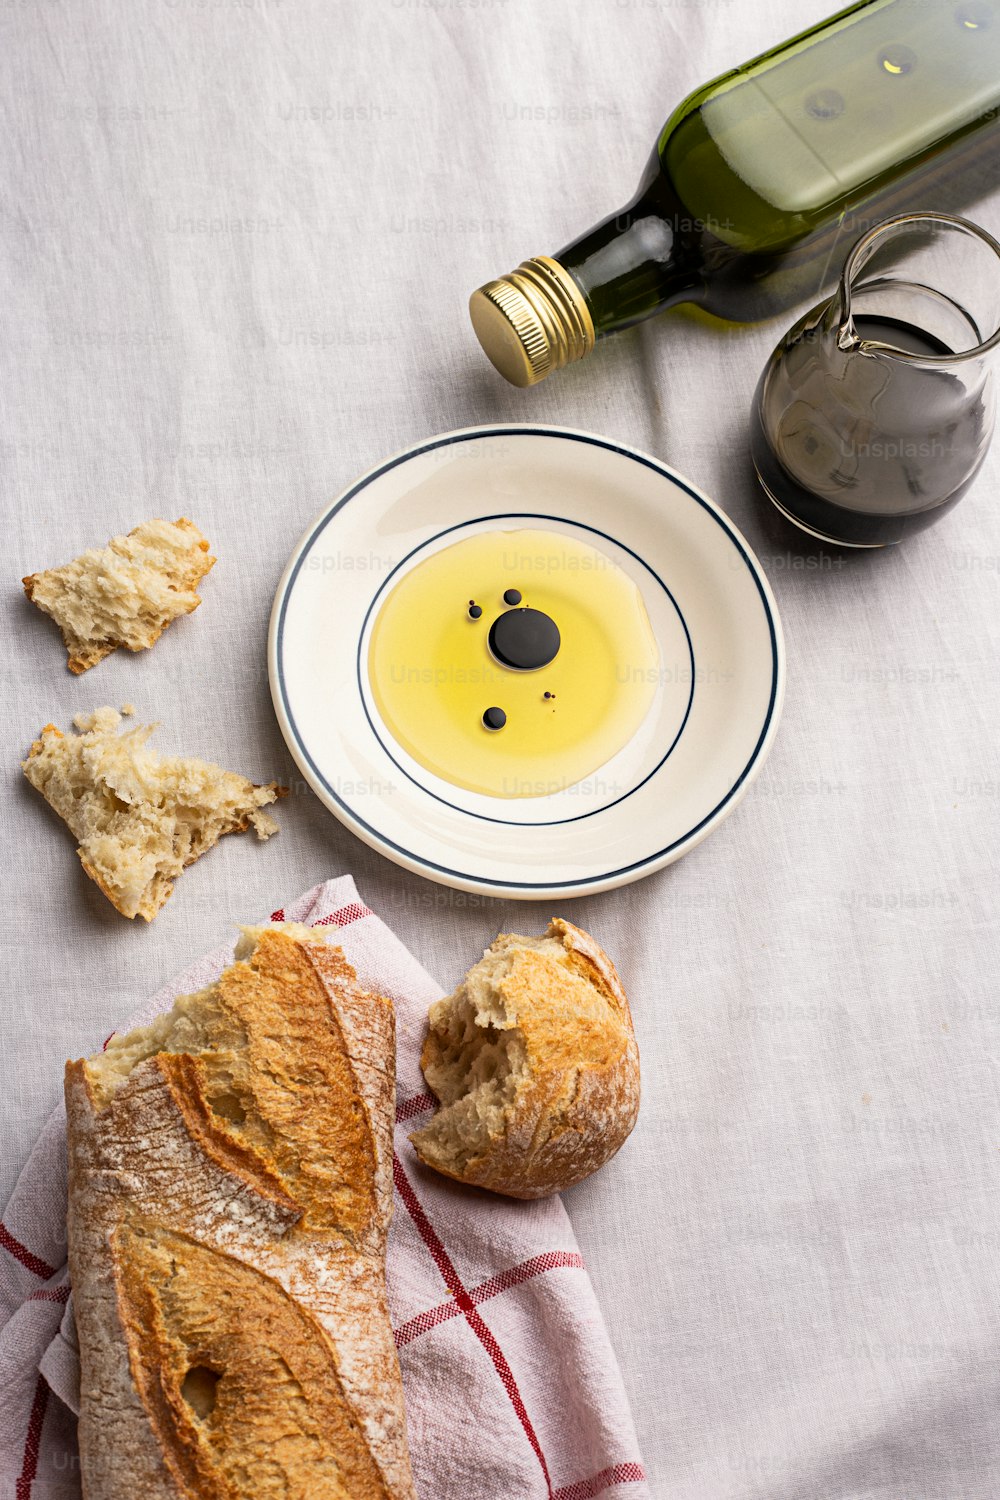 a plate of bread and a bottle of olive oil